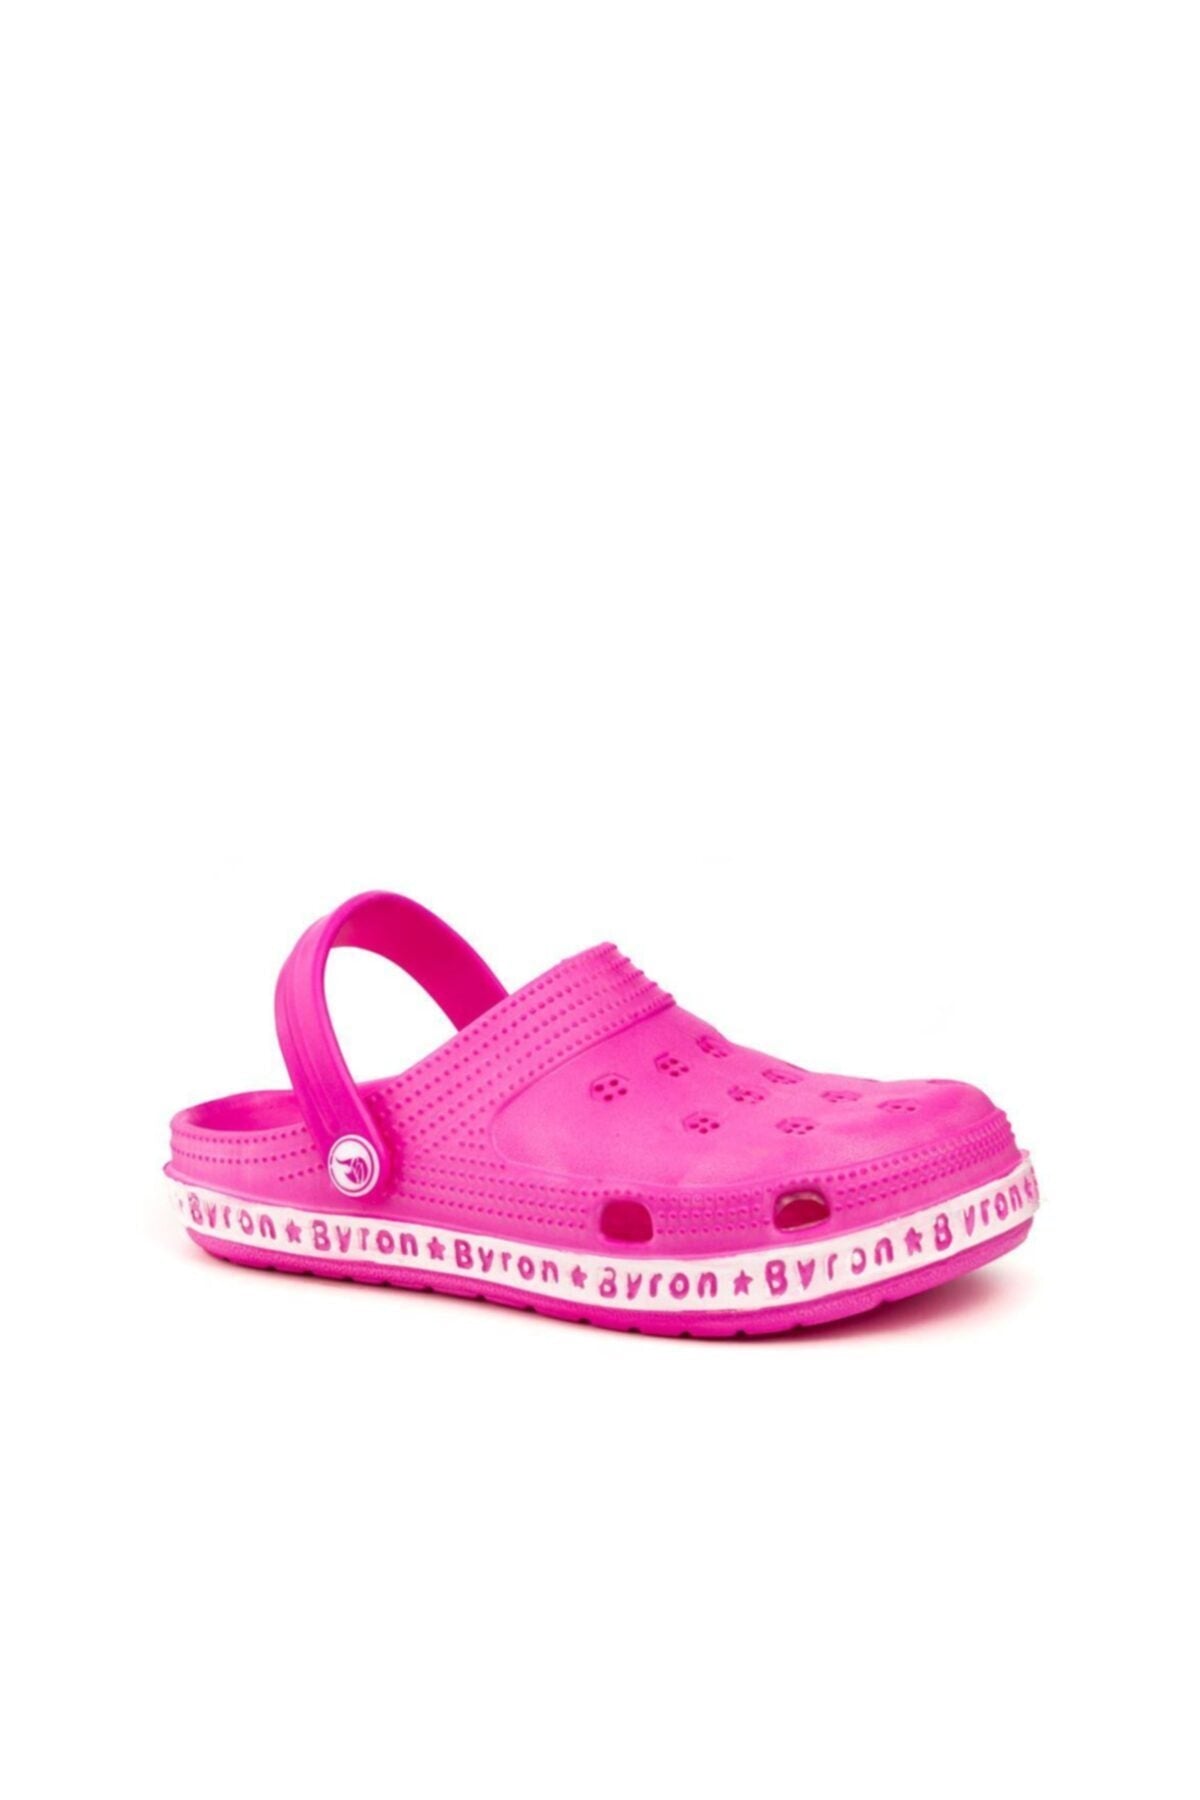 1102 sandals slippers beach sea pool daily comfortable girl pink